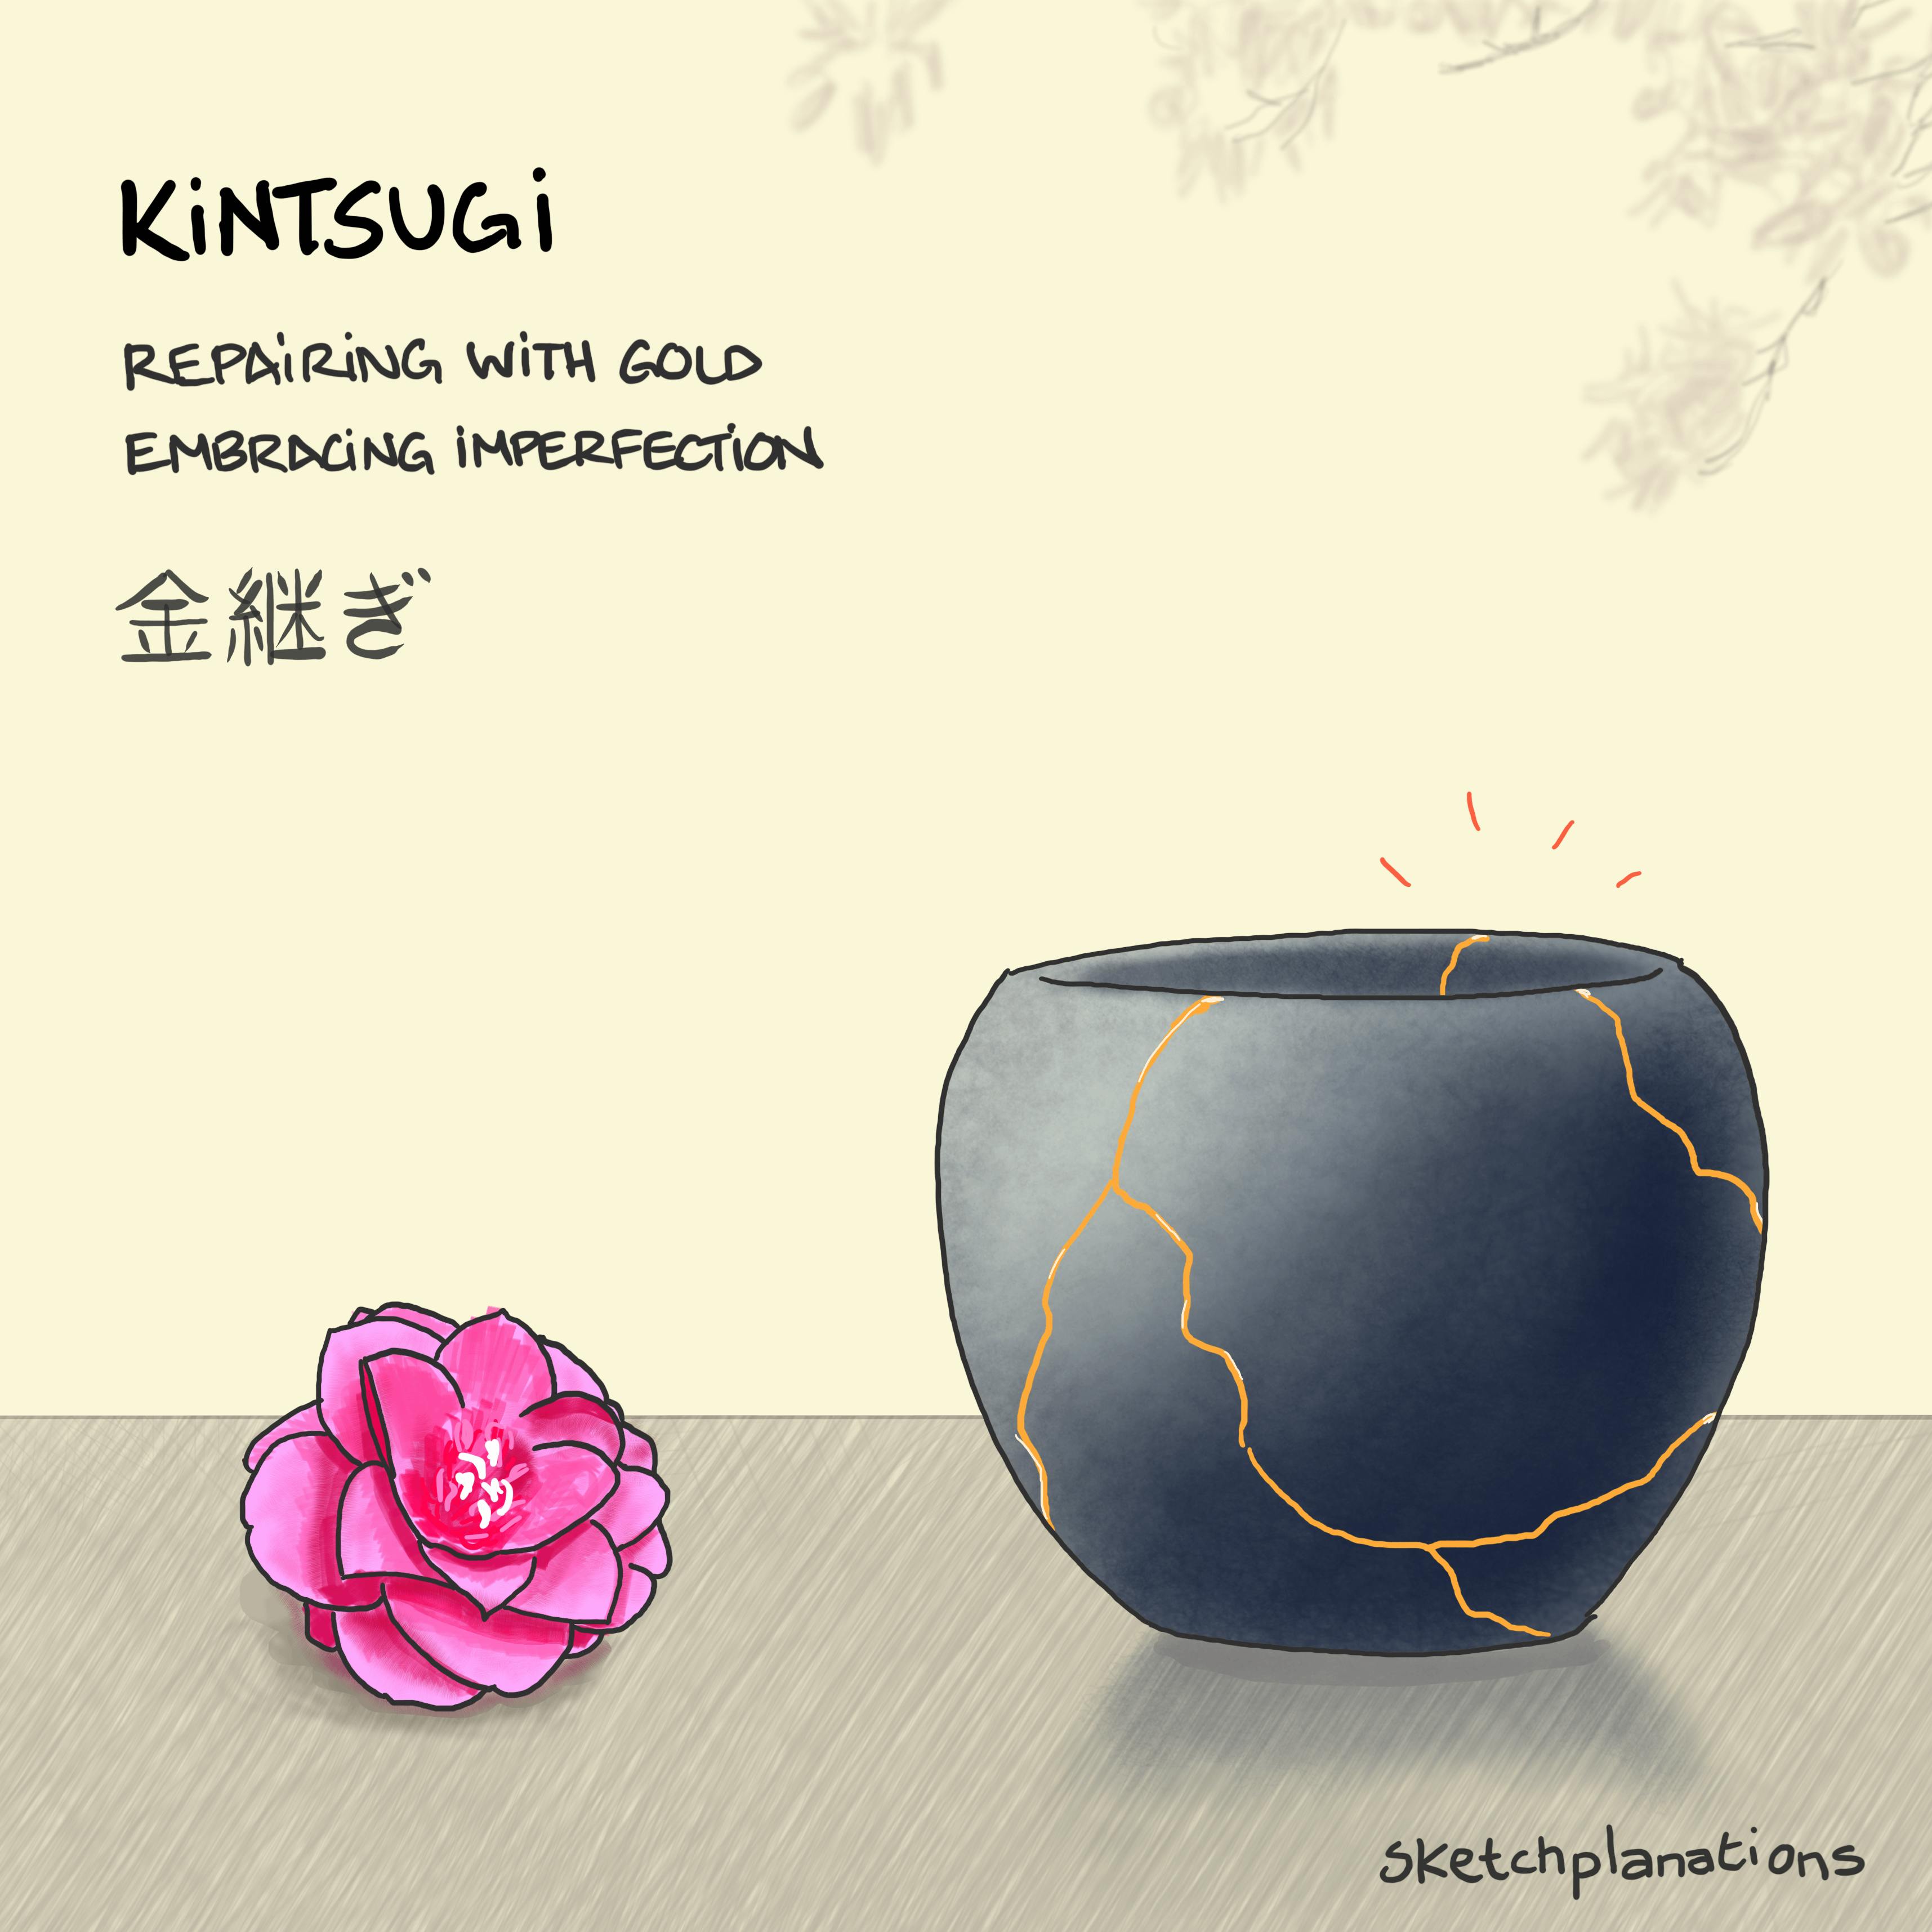 Kintsugi: A bowl repaired with kintsugi with bright gold seams visible next to a flower